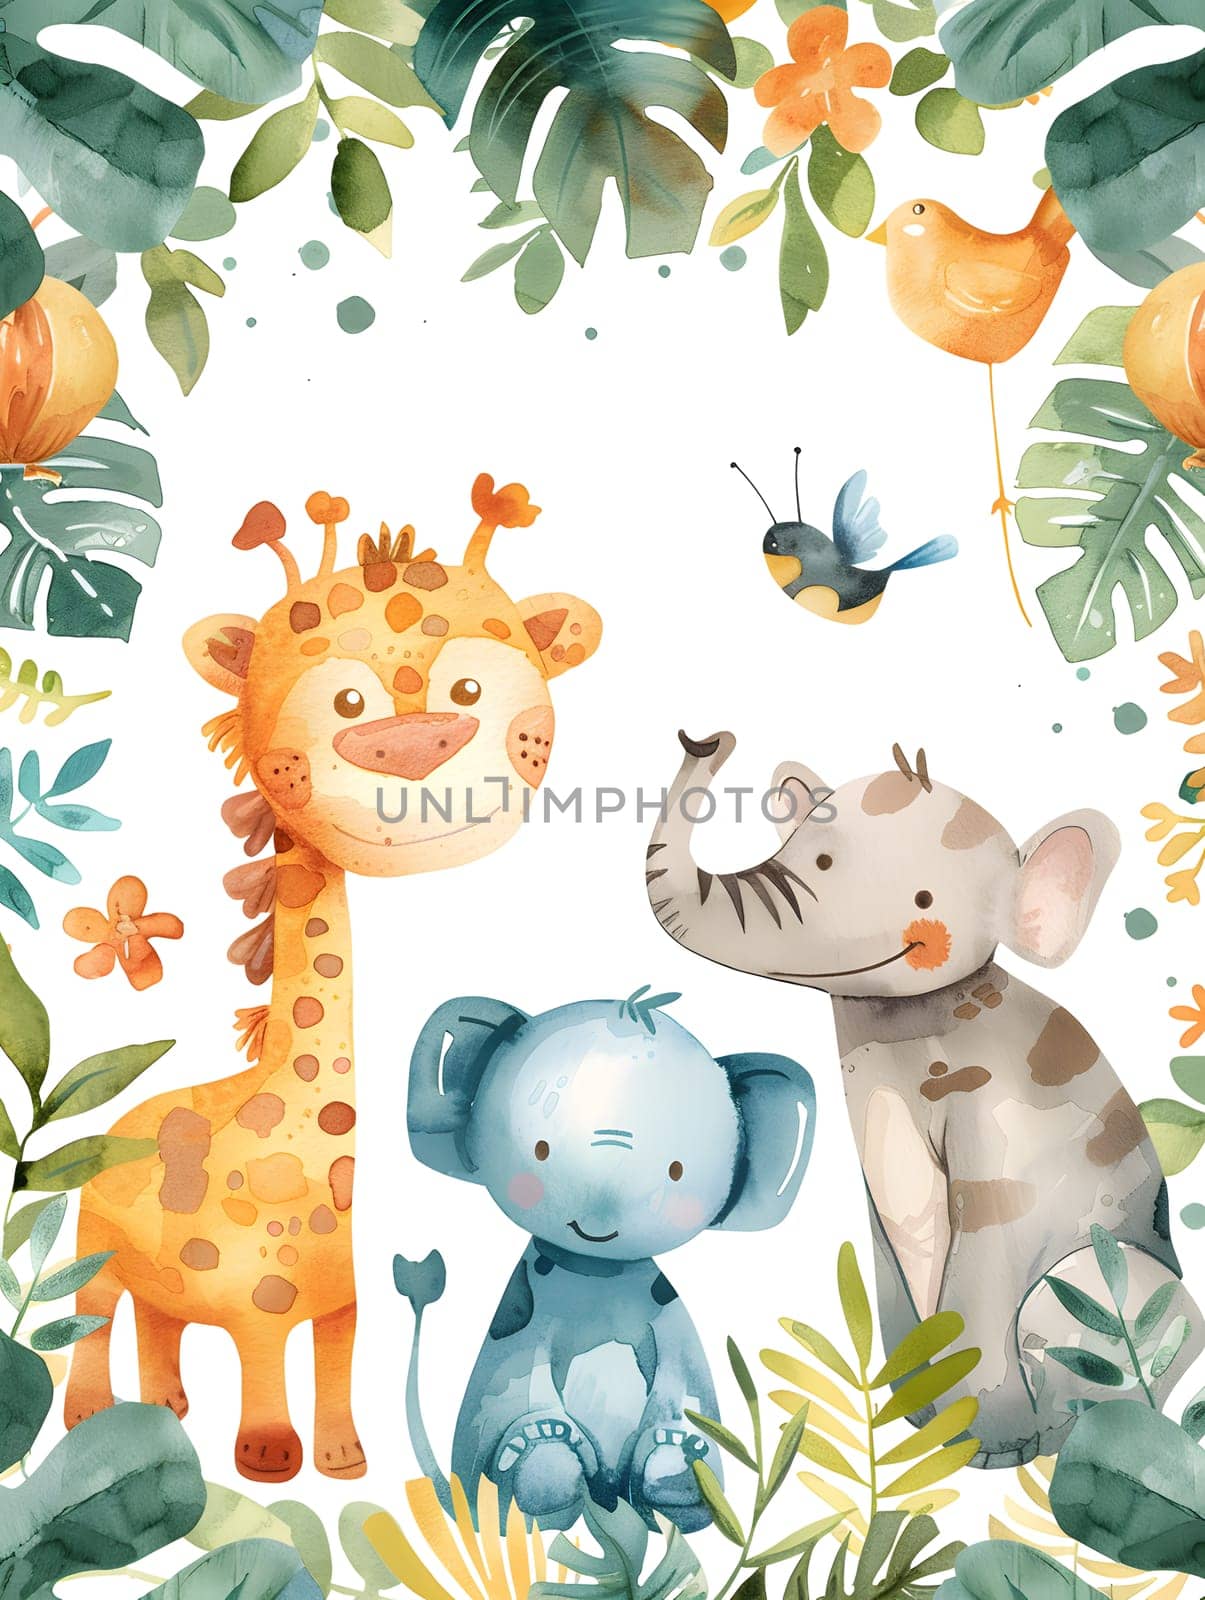 Organisms like a giraffe, elephant, and baby elephant sit happily in the jungle by Nadtochiy